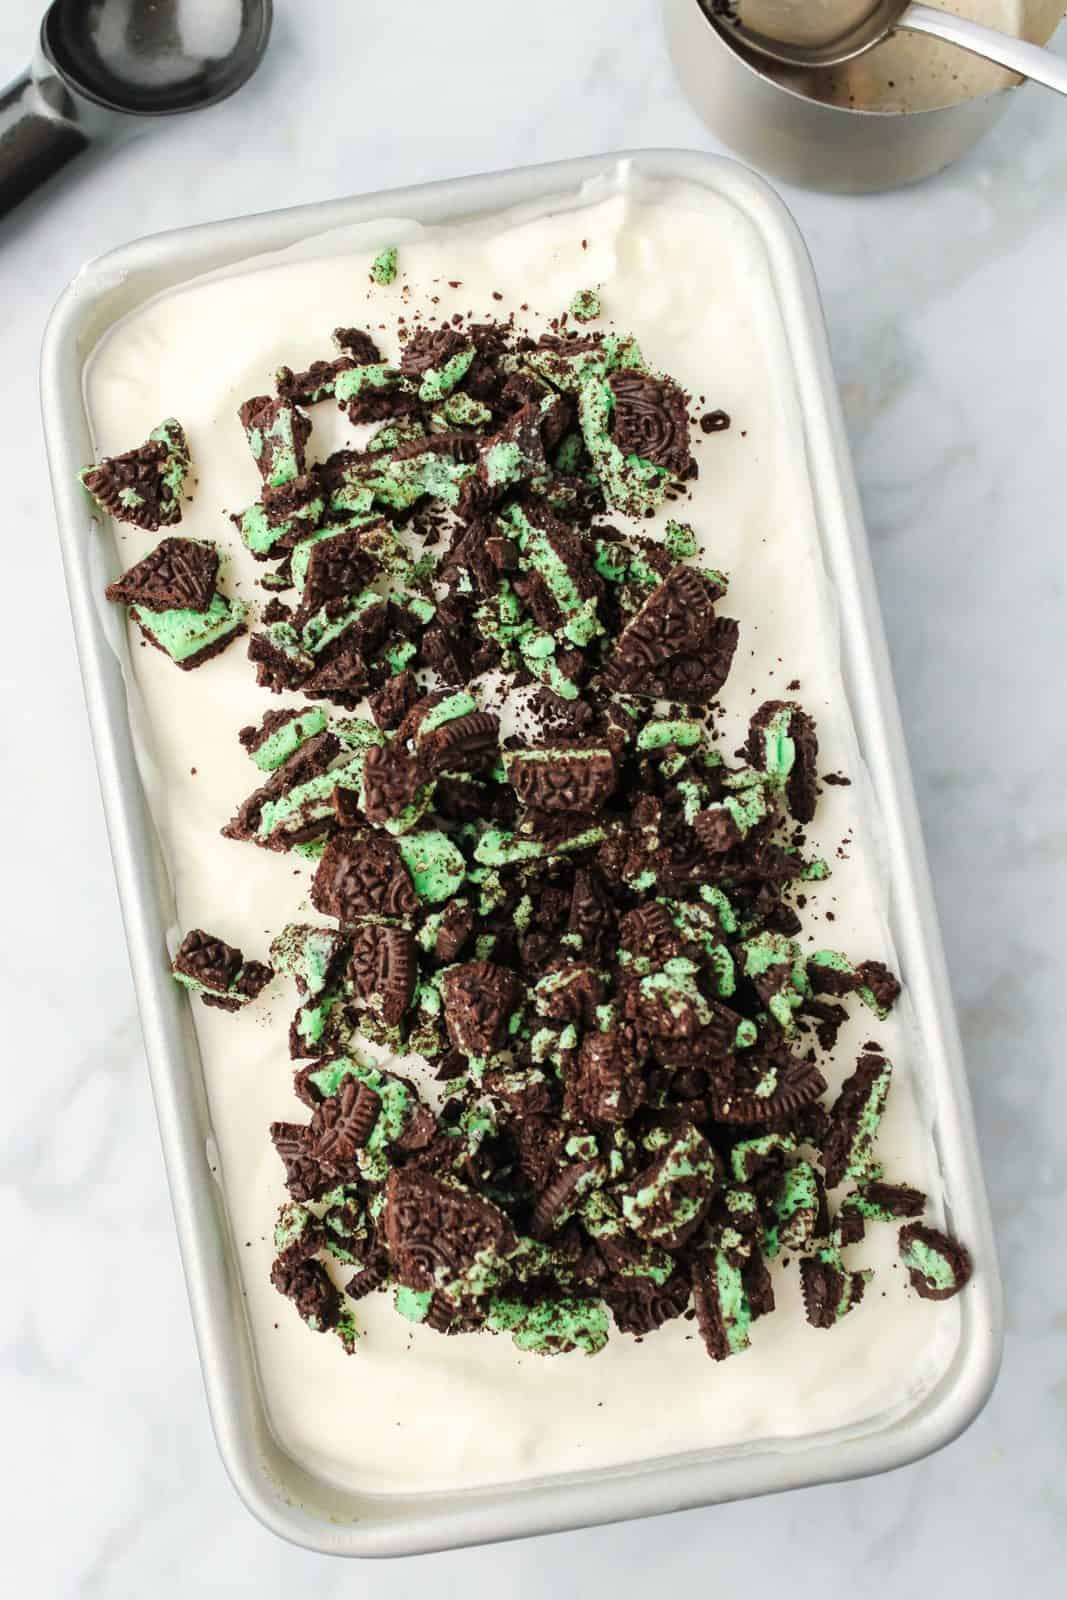 Mint cookies added to ice cream mixture in loaf pan